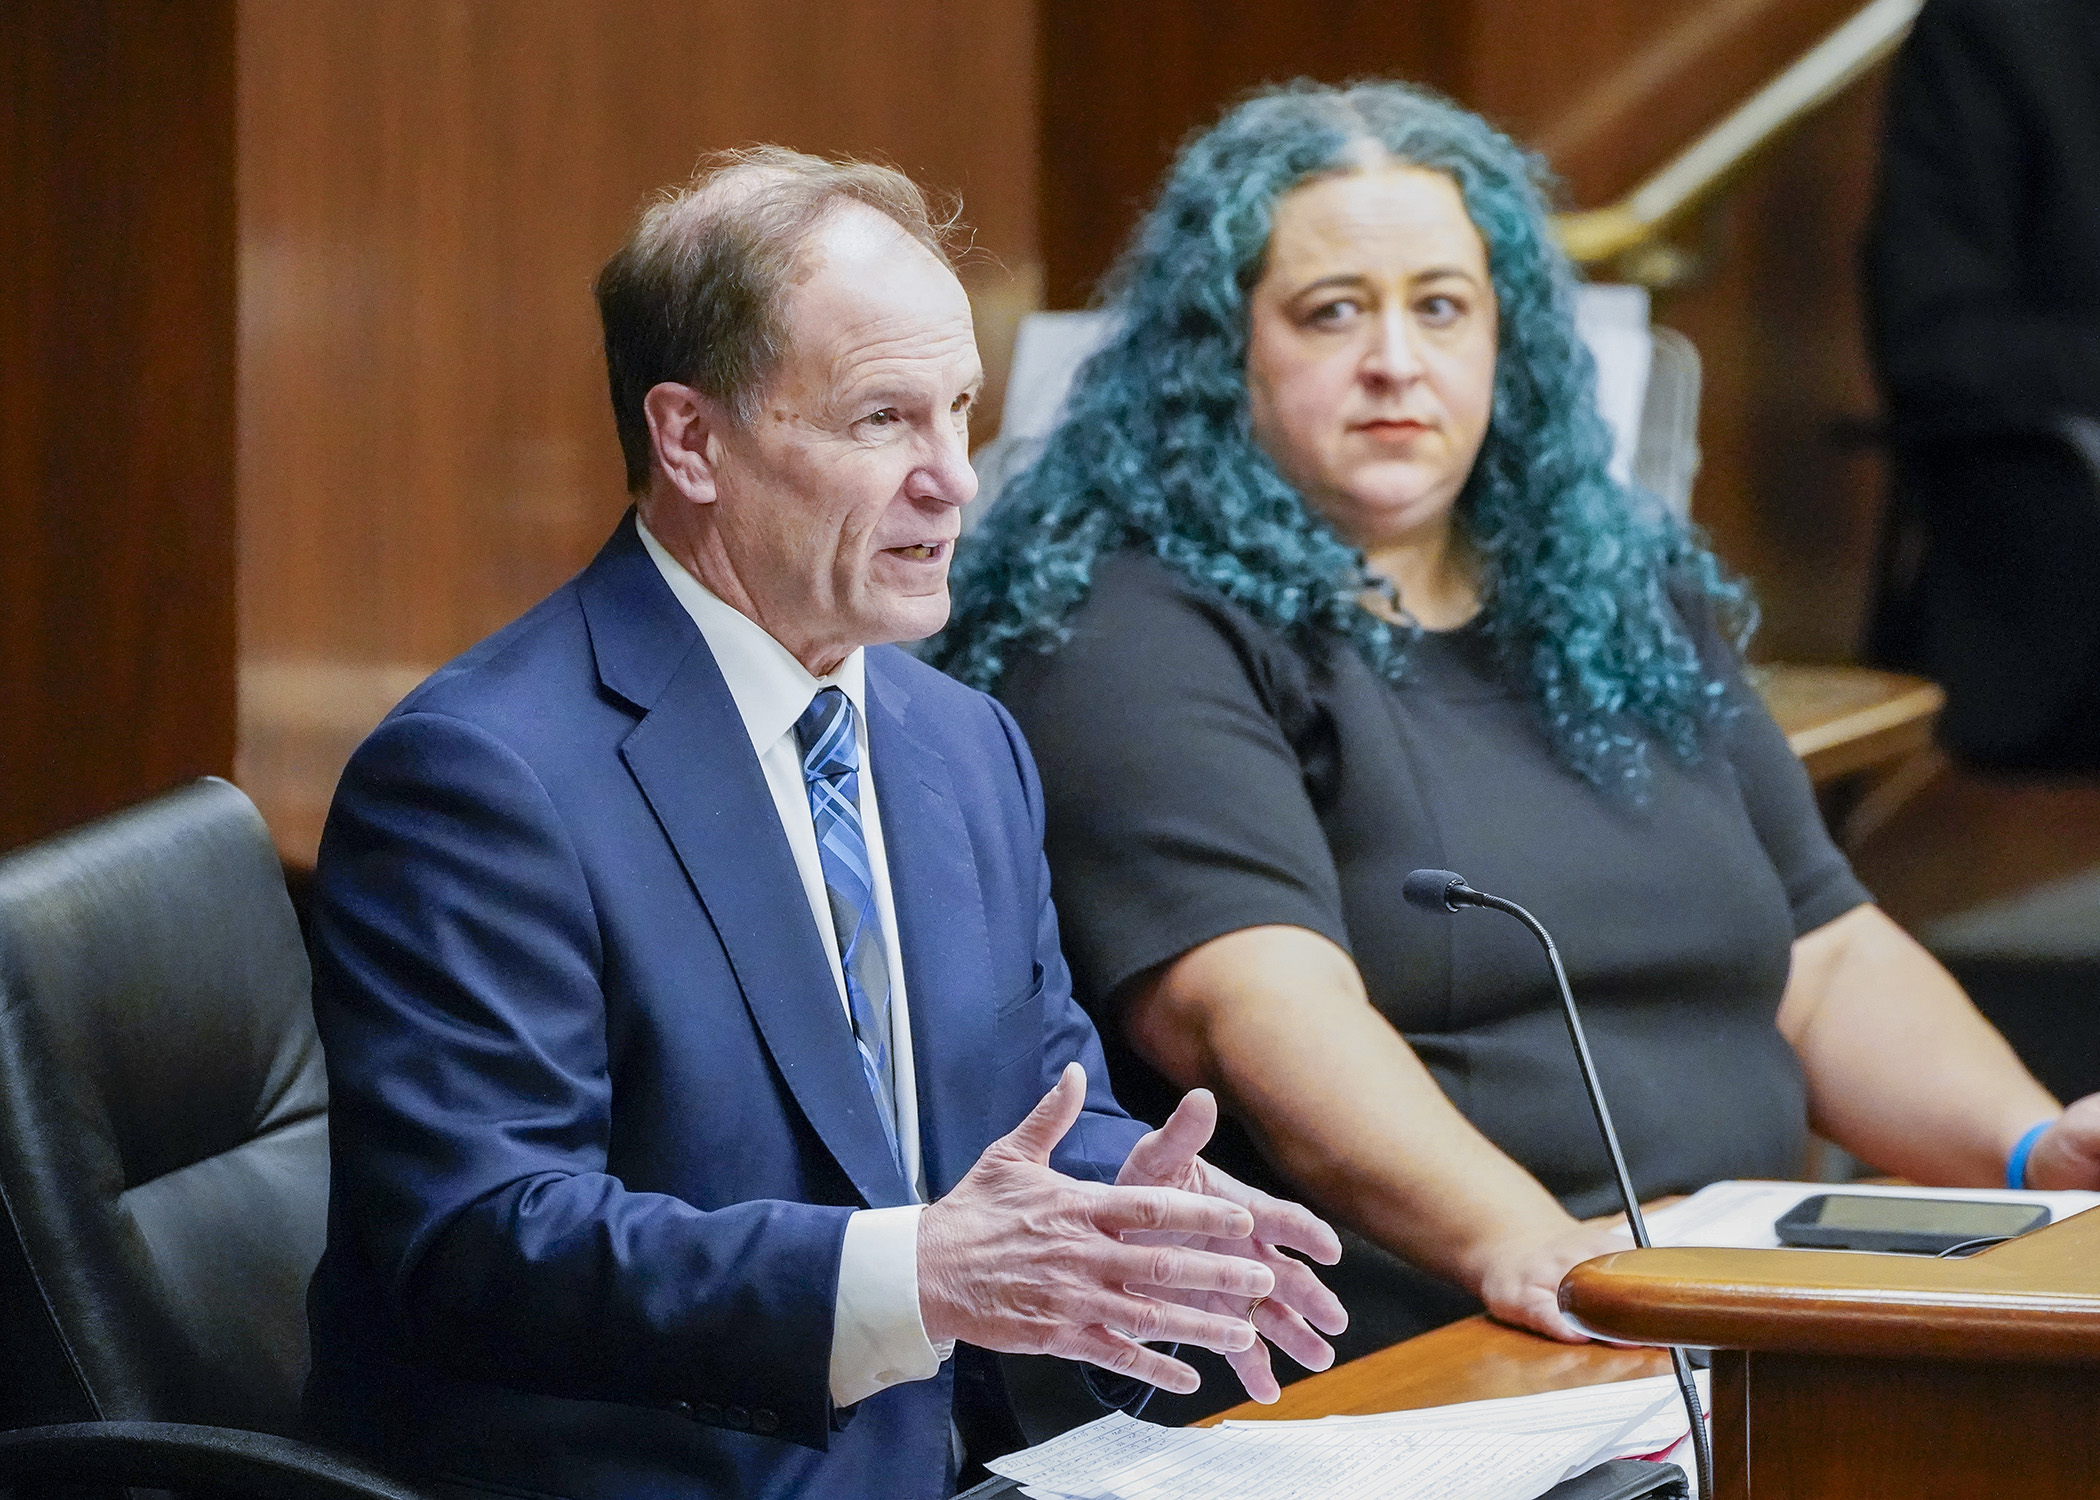 Revenue Commissioner Paul Marquart and Rep. Aisha Gomez, chair of the House Taxes Committee, testify on HF2757 during a hearing Feb. 12. (Photo by Andrew VonBank)